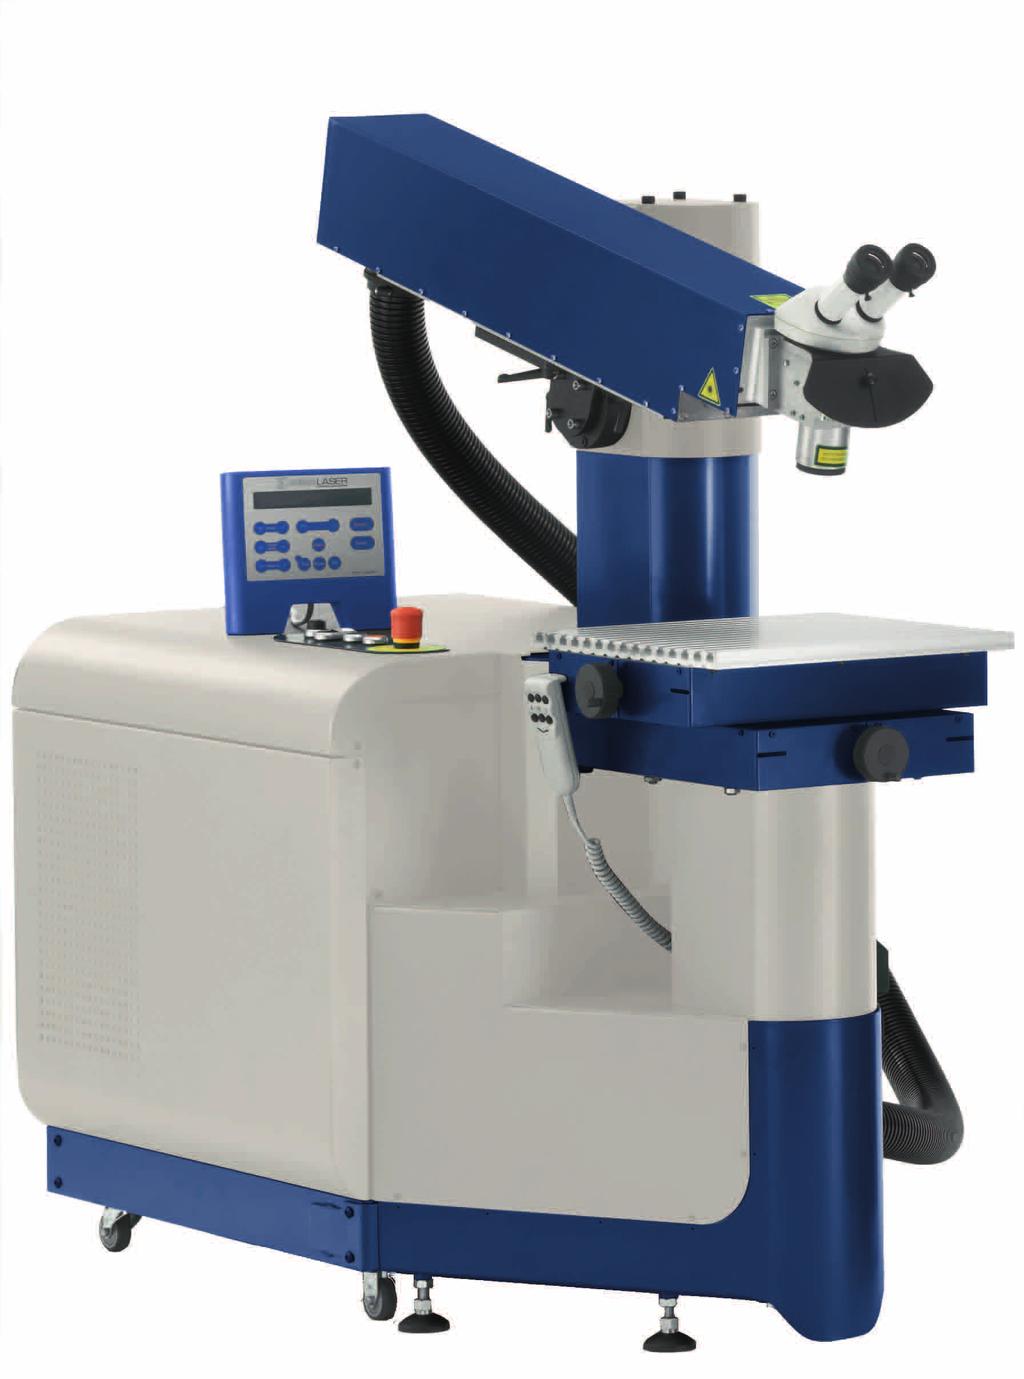 Stationary Laser Laser power up to 500 watts Compact Ergonomic Modular Our laser systems are designed to satisfy the specific requirements of the tool- and mould-making industry.